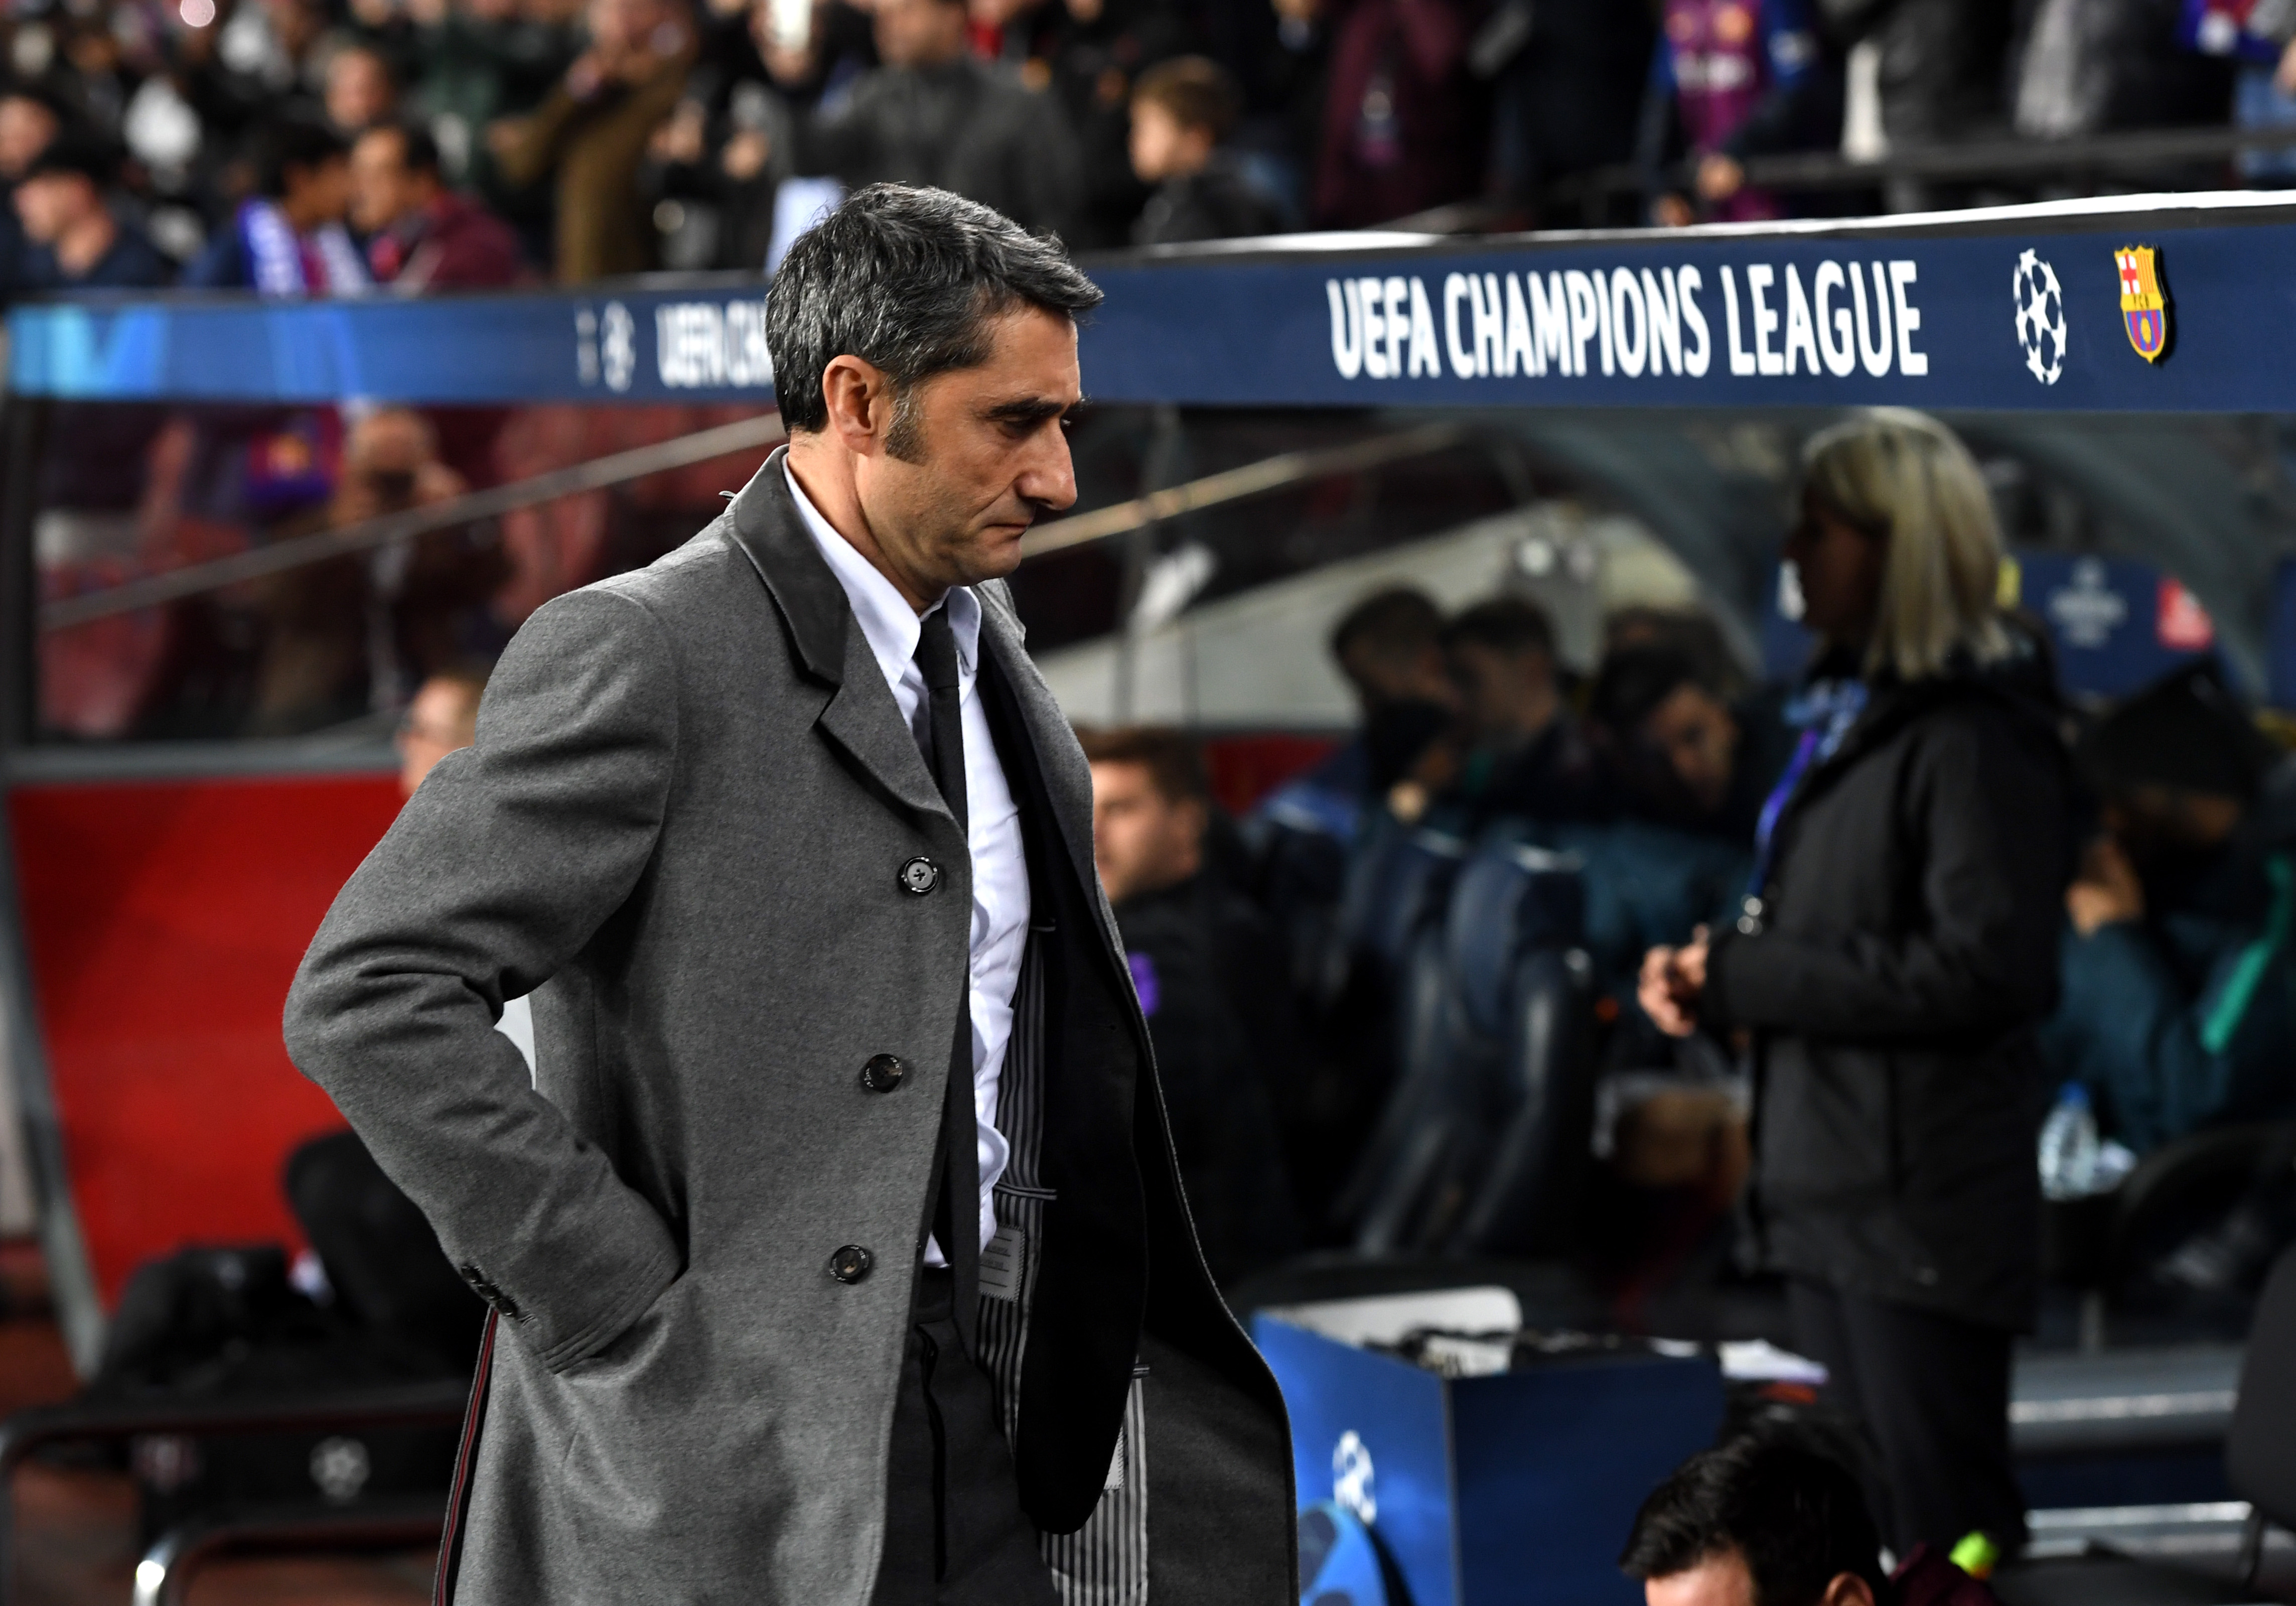 BARCELONA, SPAIN - DECEMBER 11:  Ernesto Valverde, Manager of Barcelona looks on prior to the UEFA Champions League Group B match between FC Barcelona and Tottenham Hotspur at Camp Nou on December 11, 2018 in Barcelona, Spain.  (Photo by Alex Caparros/Getty Images)